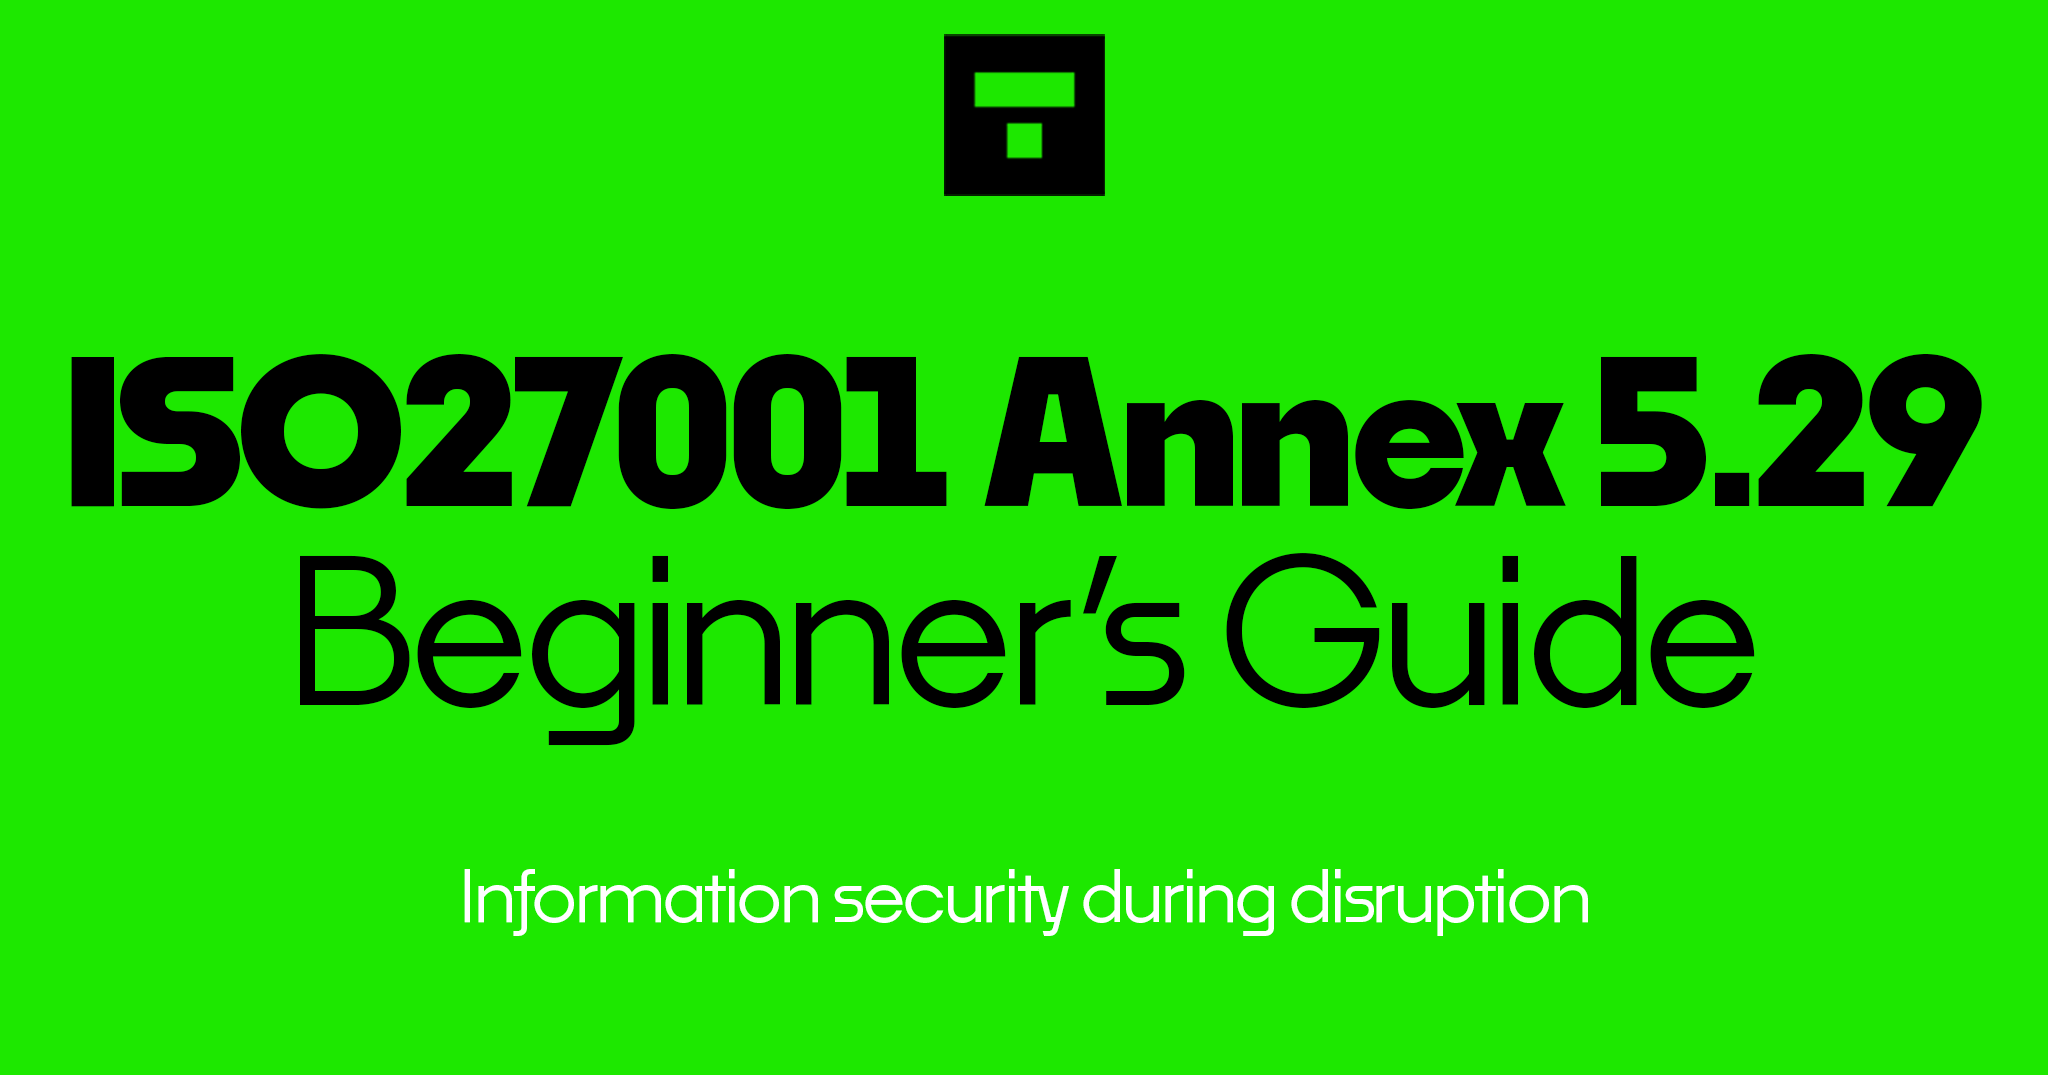 How To Implement ISO 27001 Annex A 5.29 Information Security During Disruption